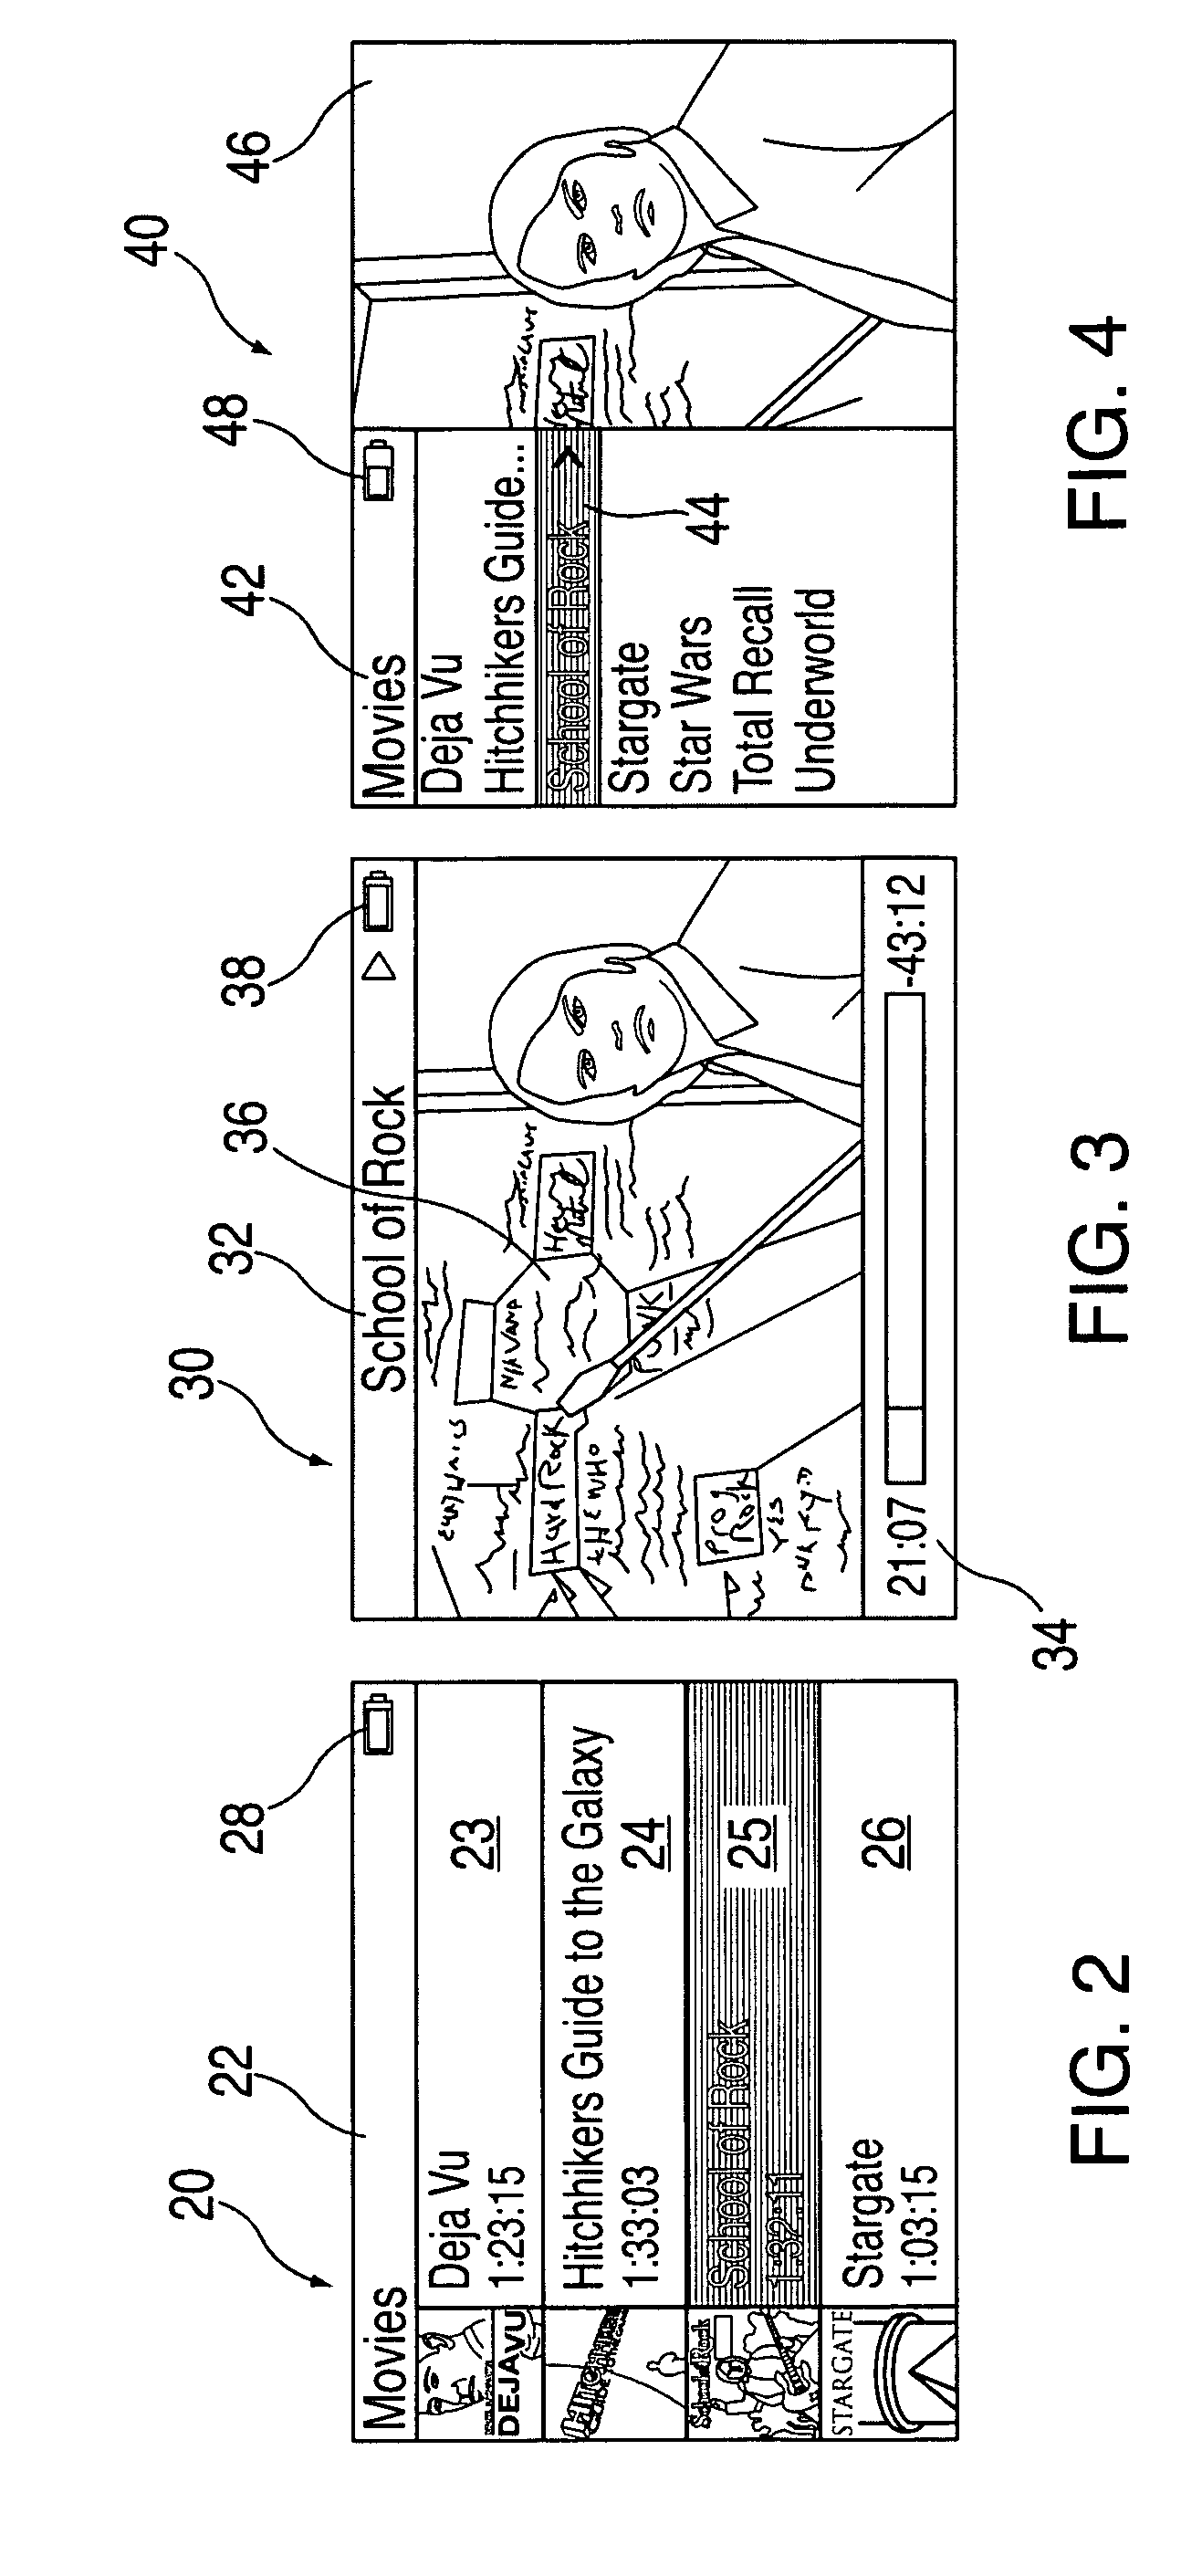 Method and apparatus for providing seamless resumption of video playback